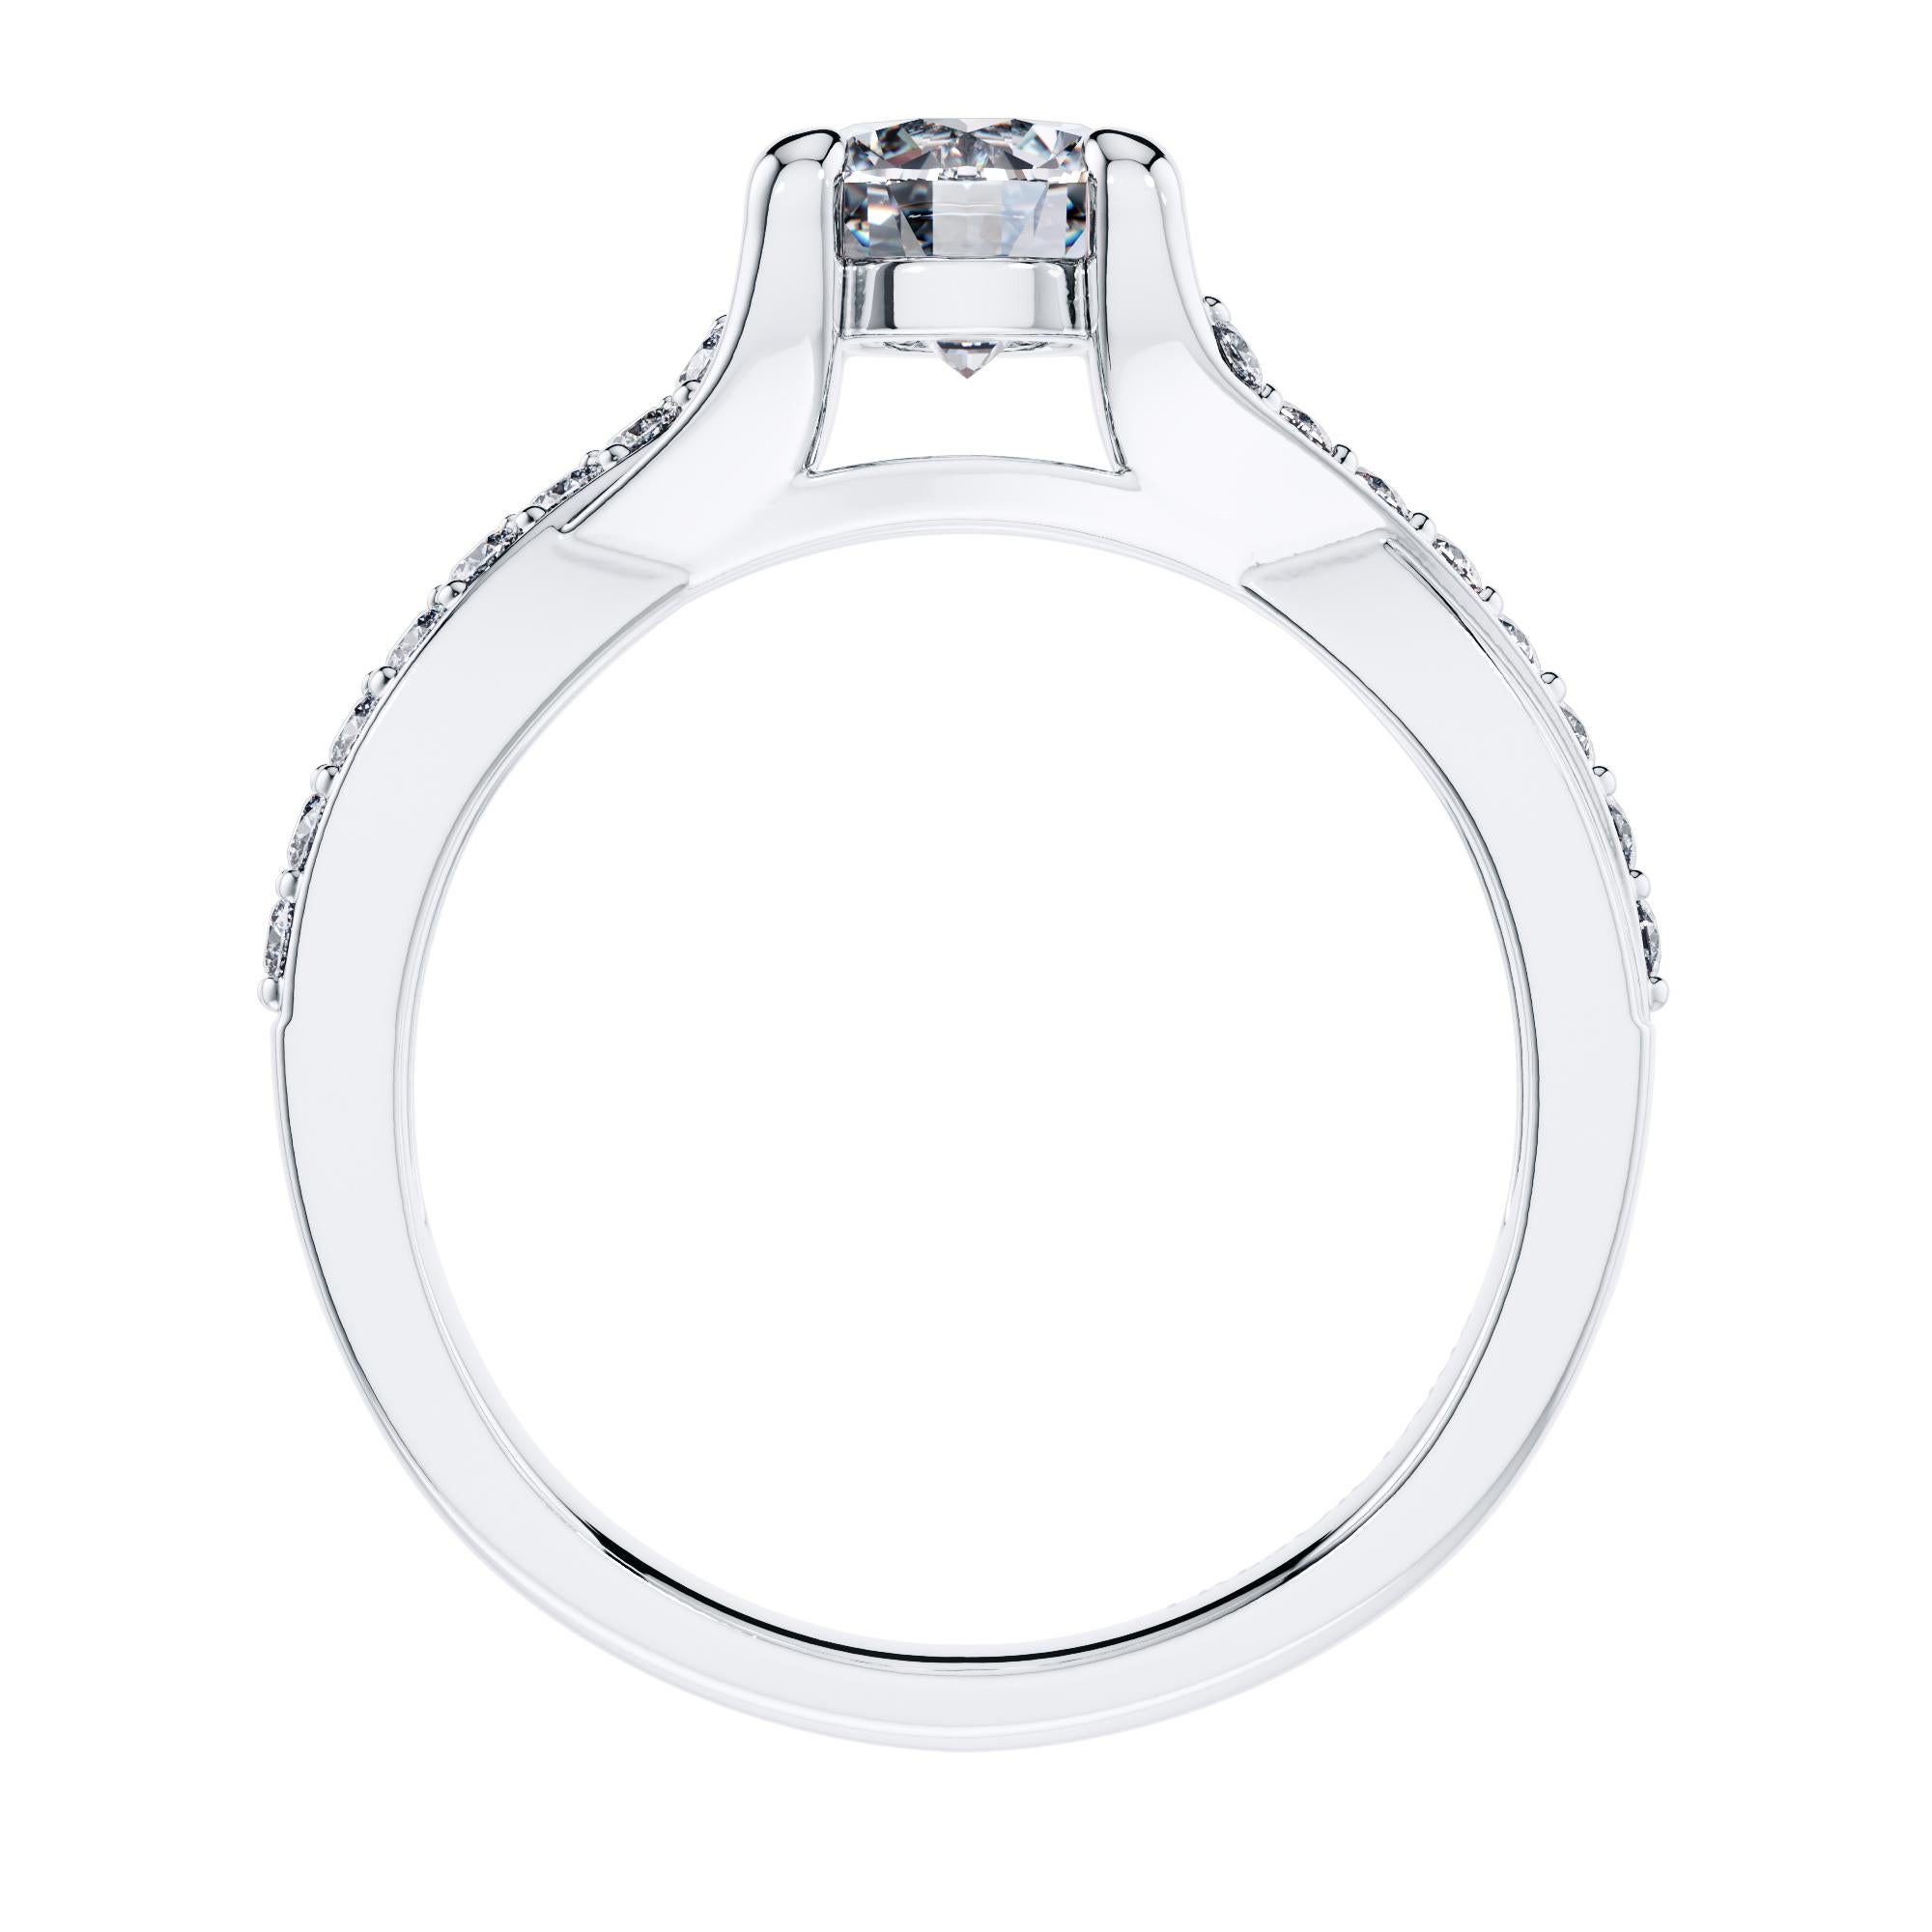 For a beautifully entwined journey together, this gleaming twisted vine modern classic engagement ring. Handmade in high grade Platinum 950 to British Standard, with a total of 0.40 Carat White Diamonds. Set in an open gallery 4 prong mount with a